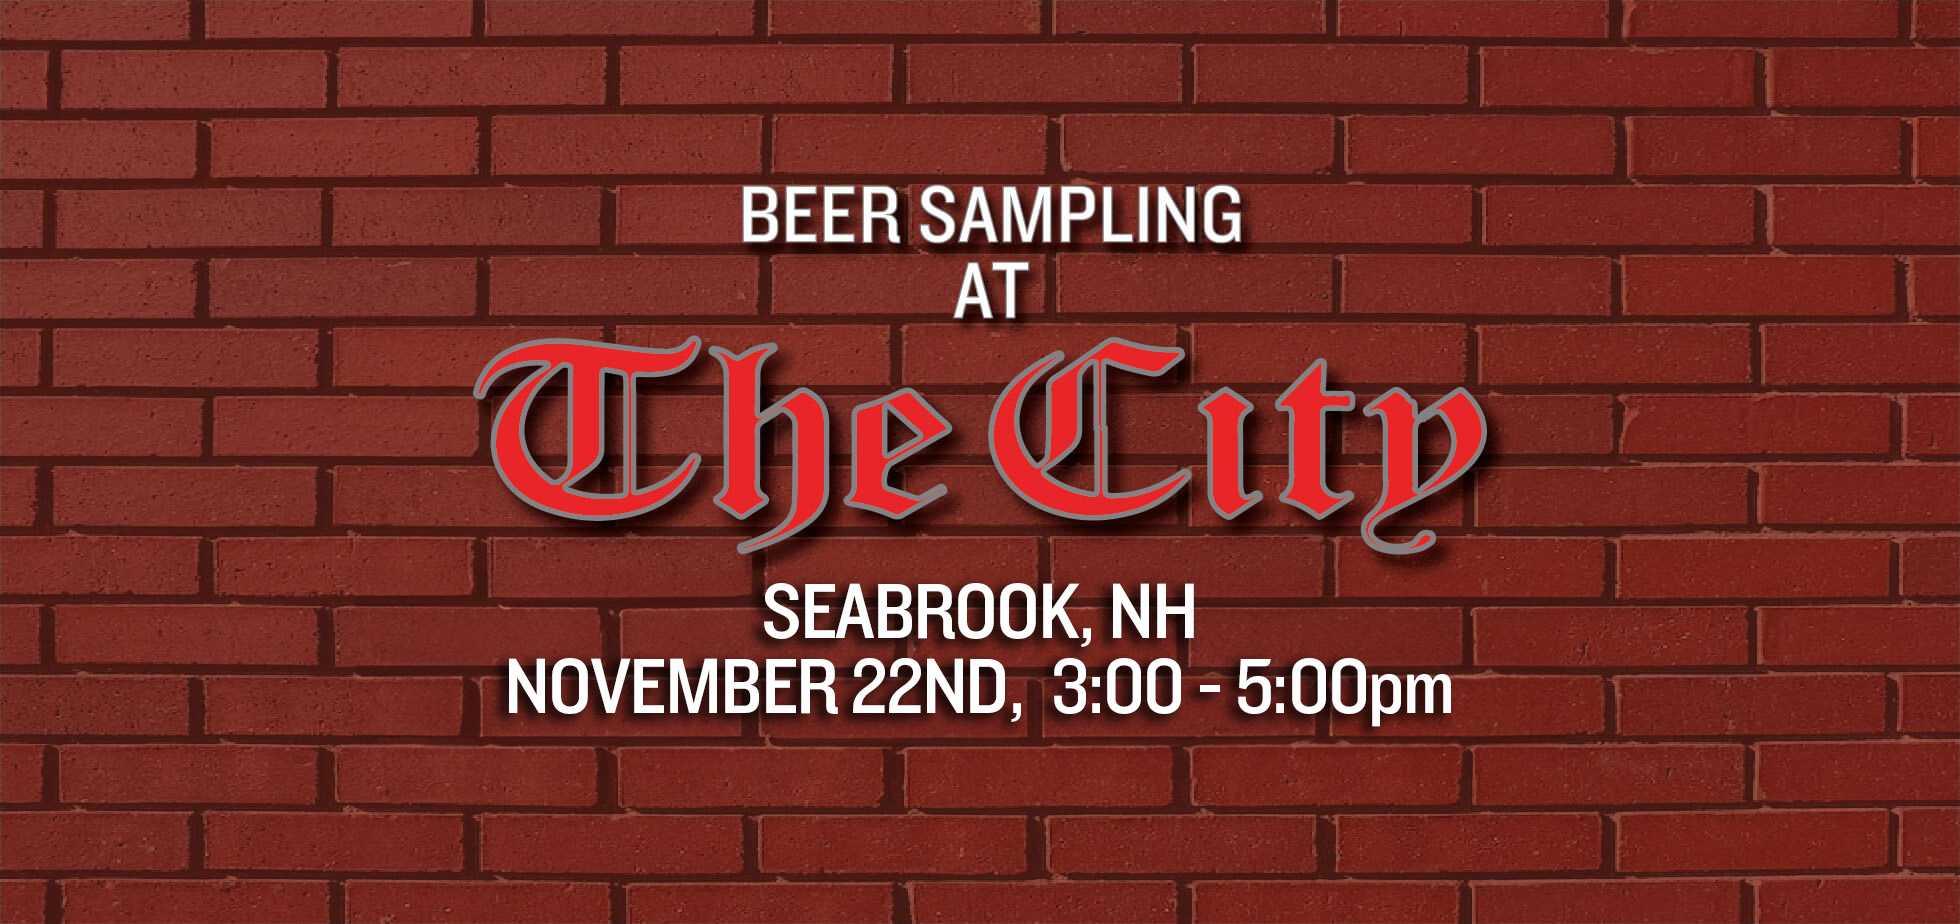 image promoting a tasting event at The City Beverage in Seabrook New Hampshire.